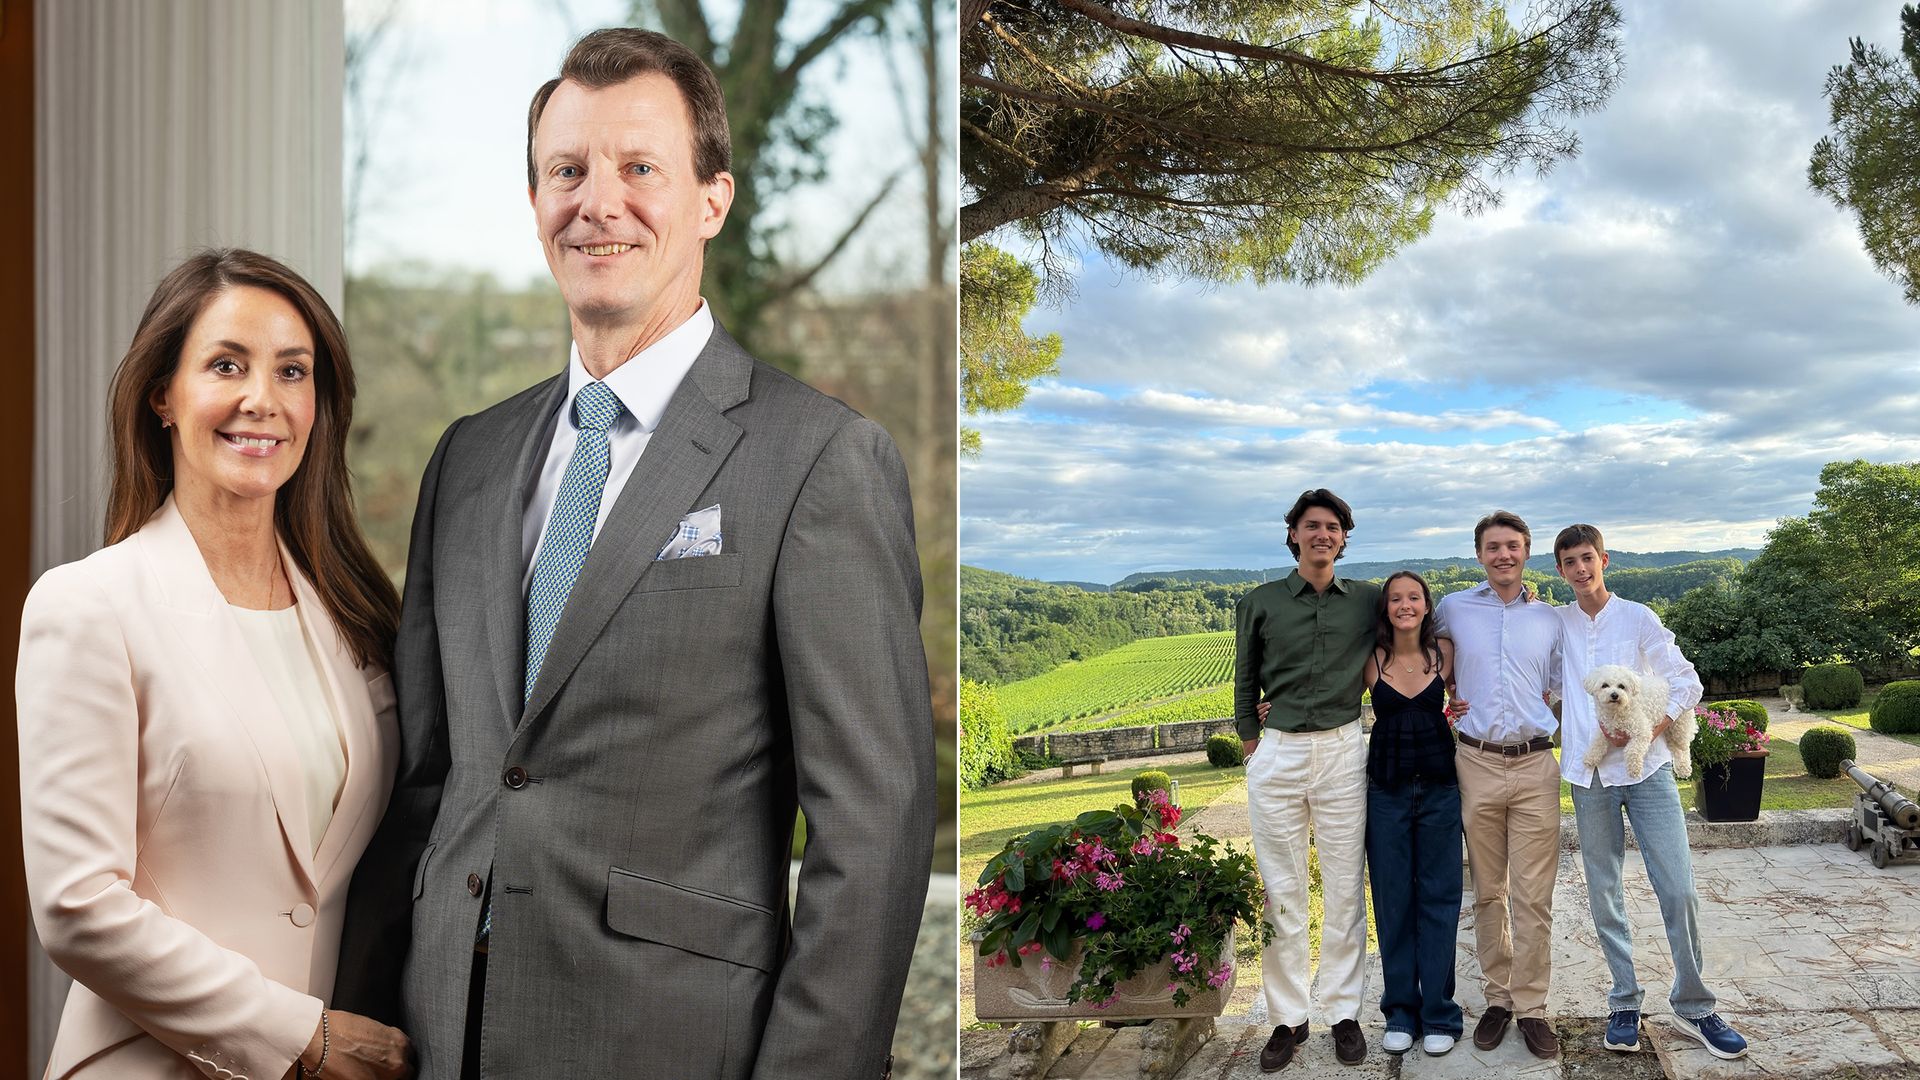 Prince Joachim and Princess Marie share rare photo of blended family during summer break